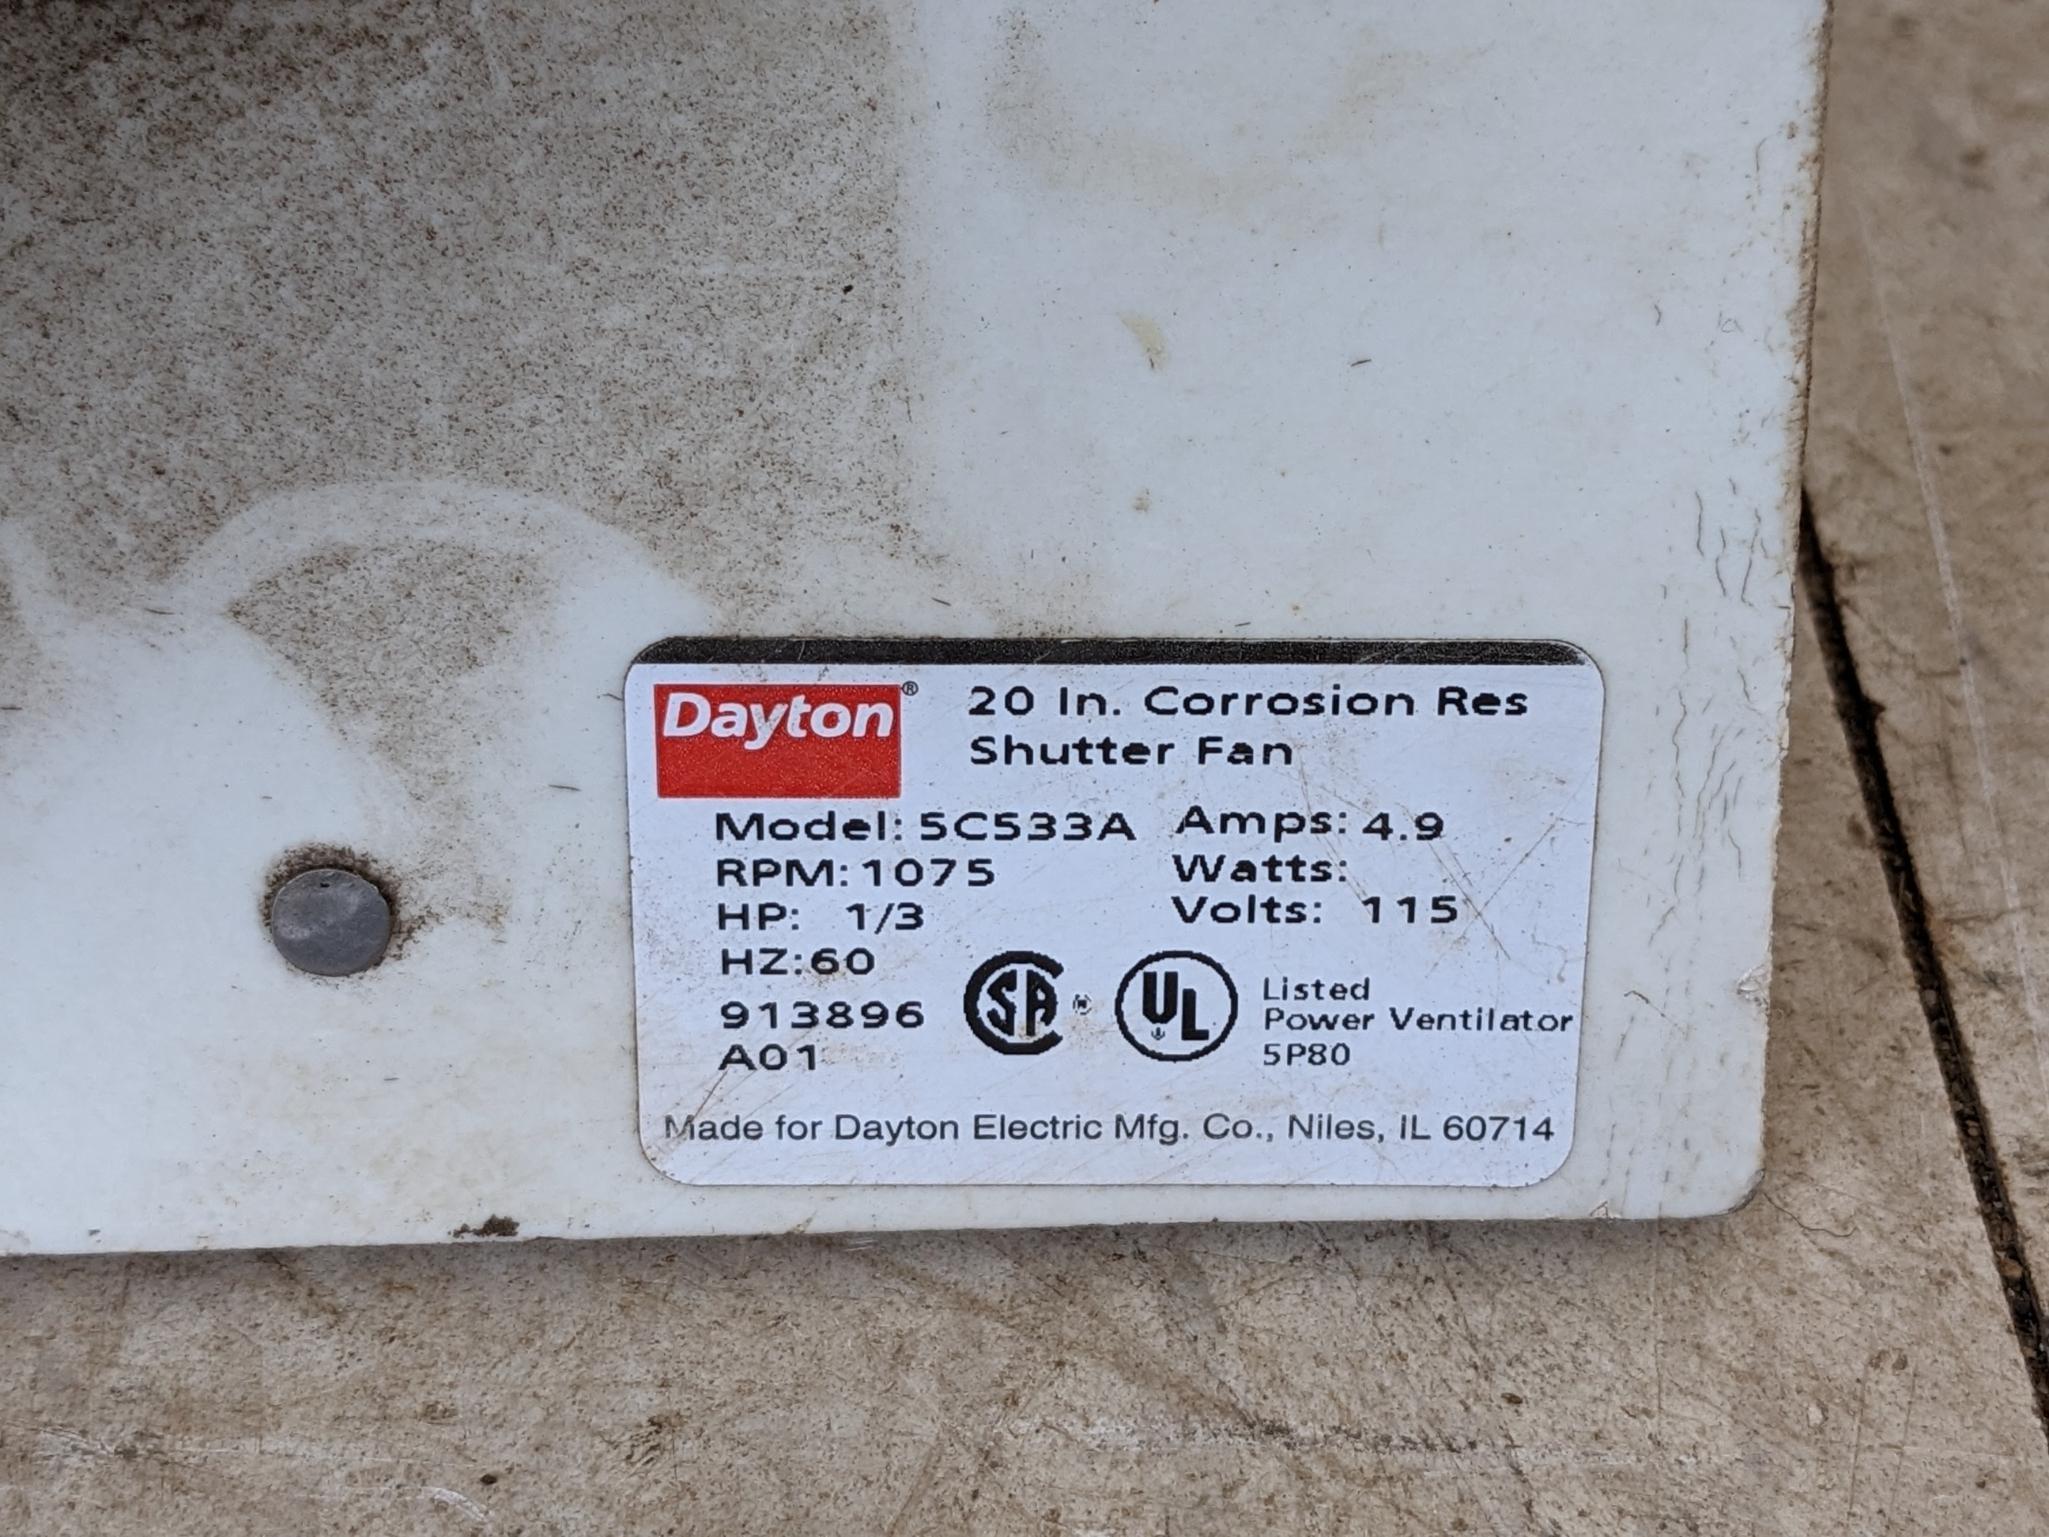 Dayton ventilation fan measures 23"x23" overall, all the louvers appear in good condition and has a